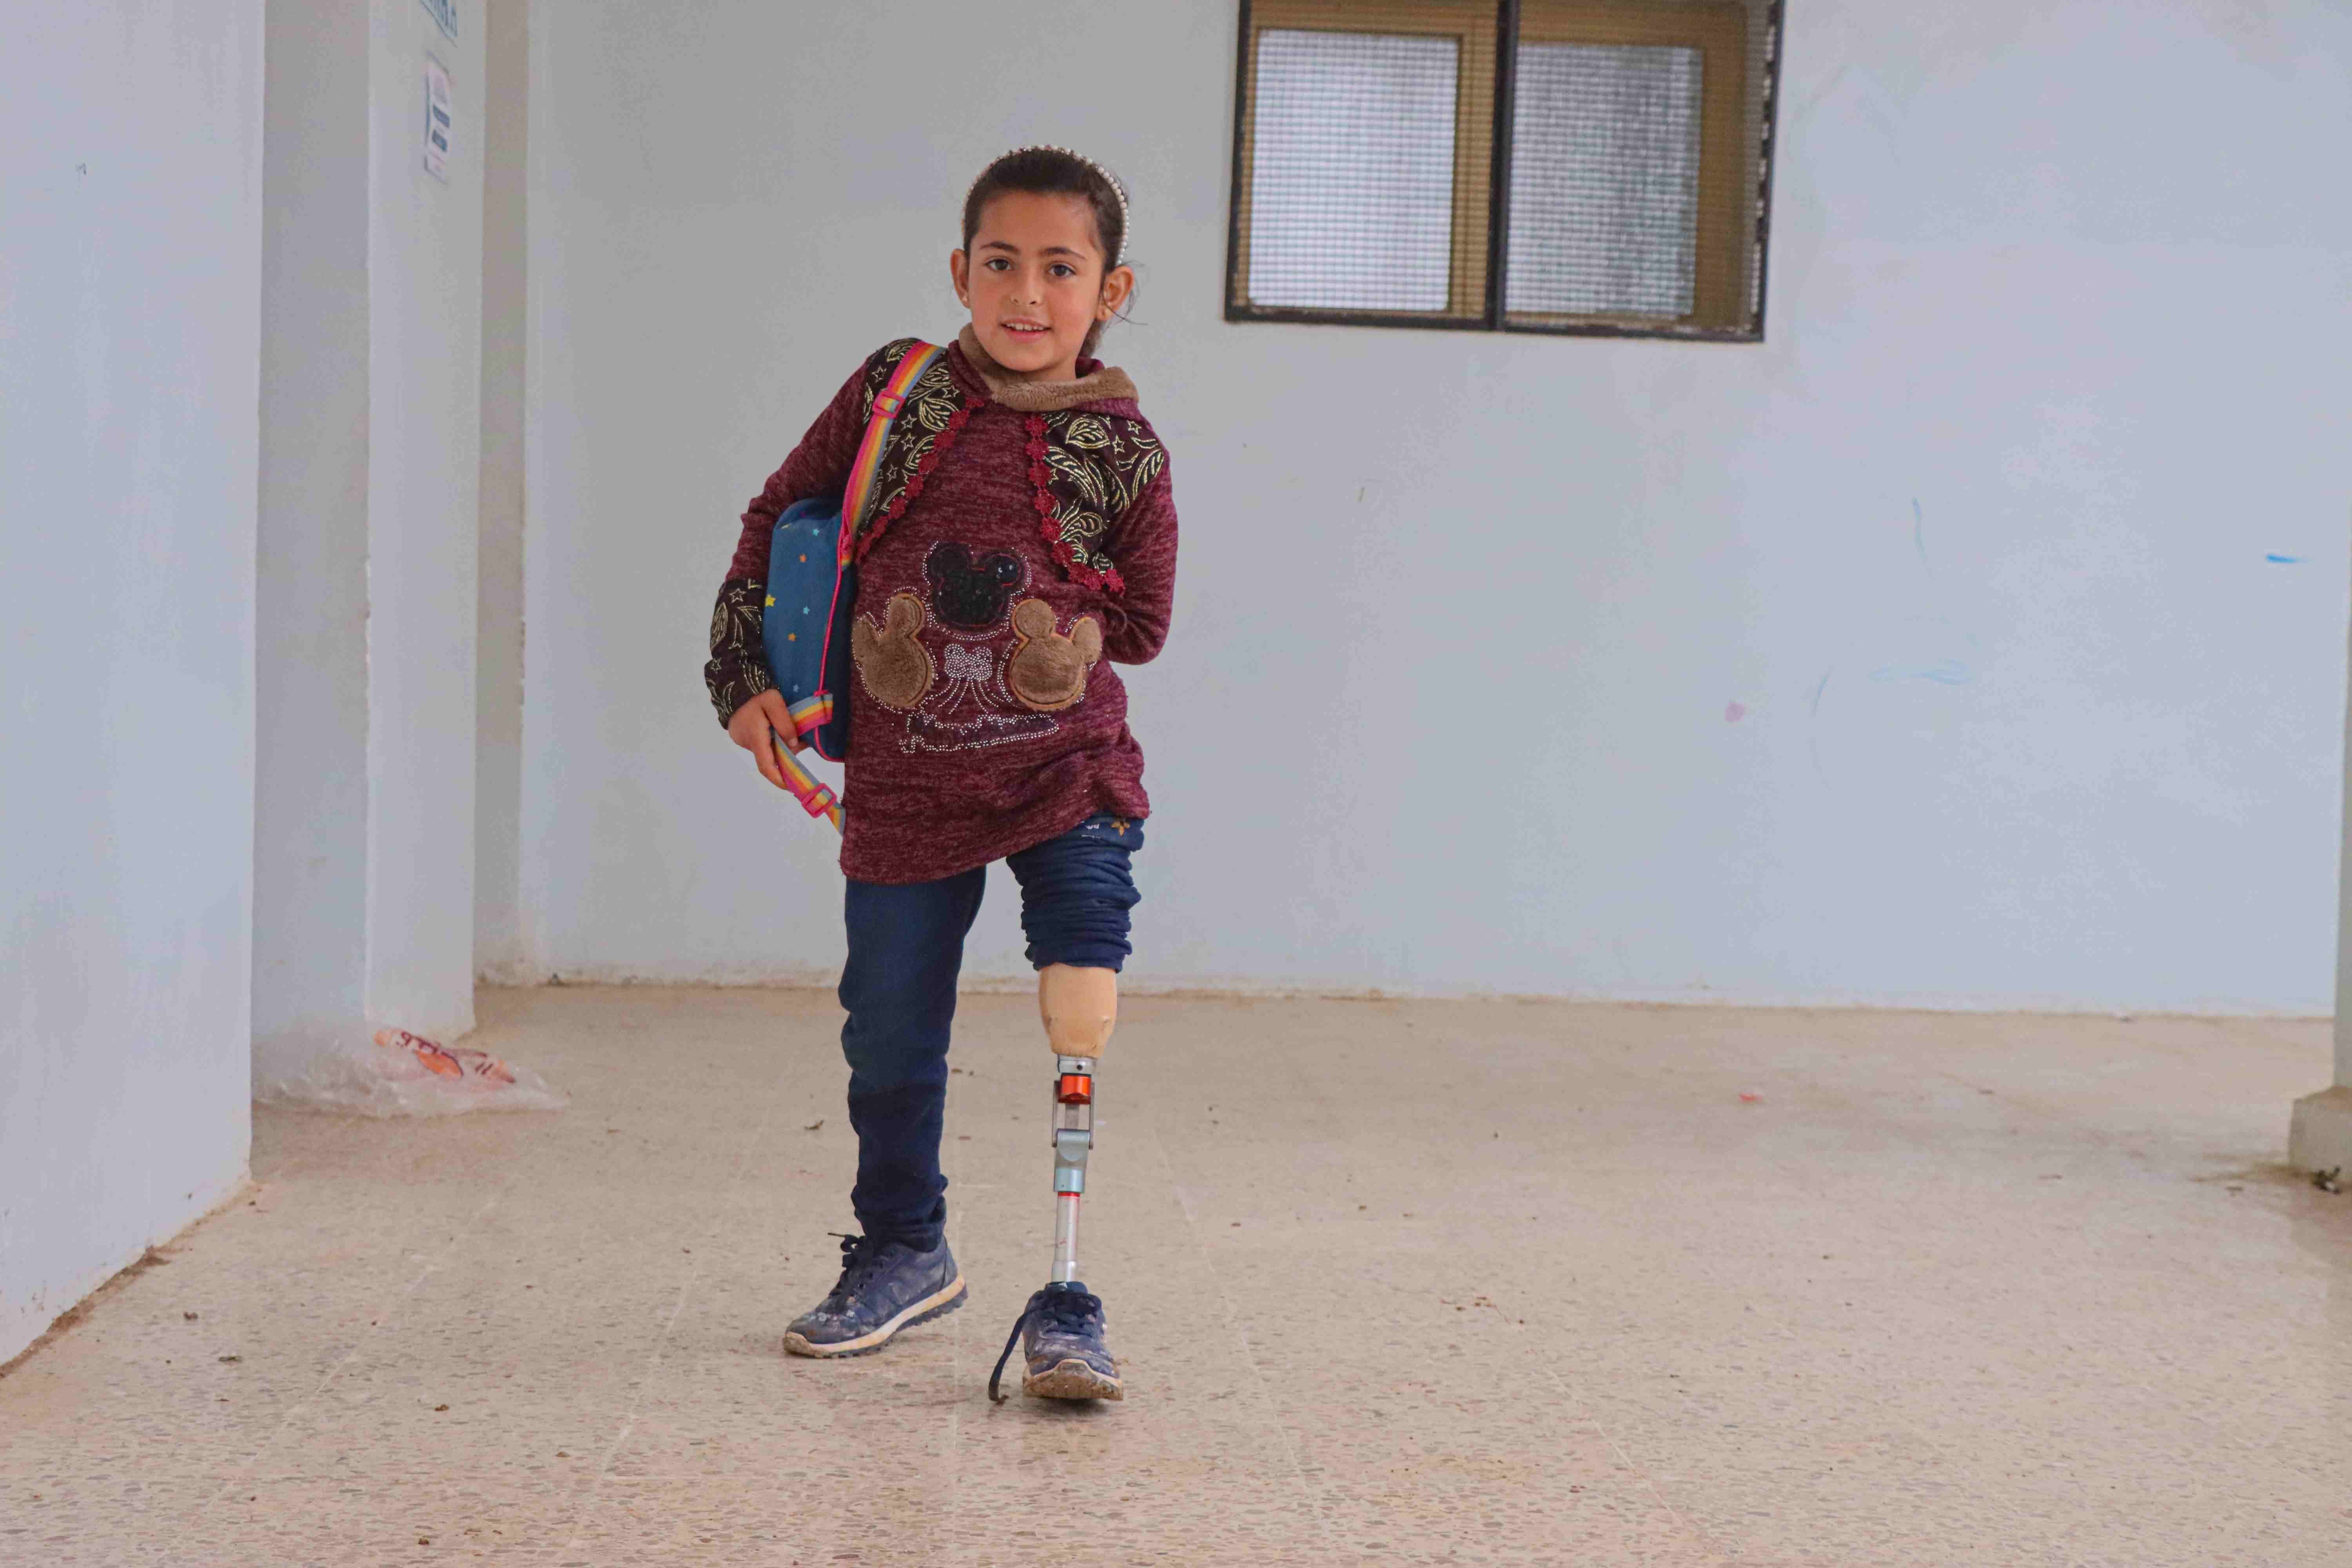 In Syria, a young girl walks using her prosthetic leg.